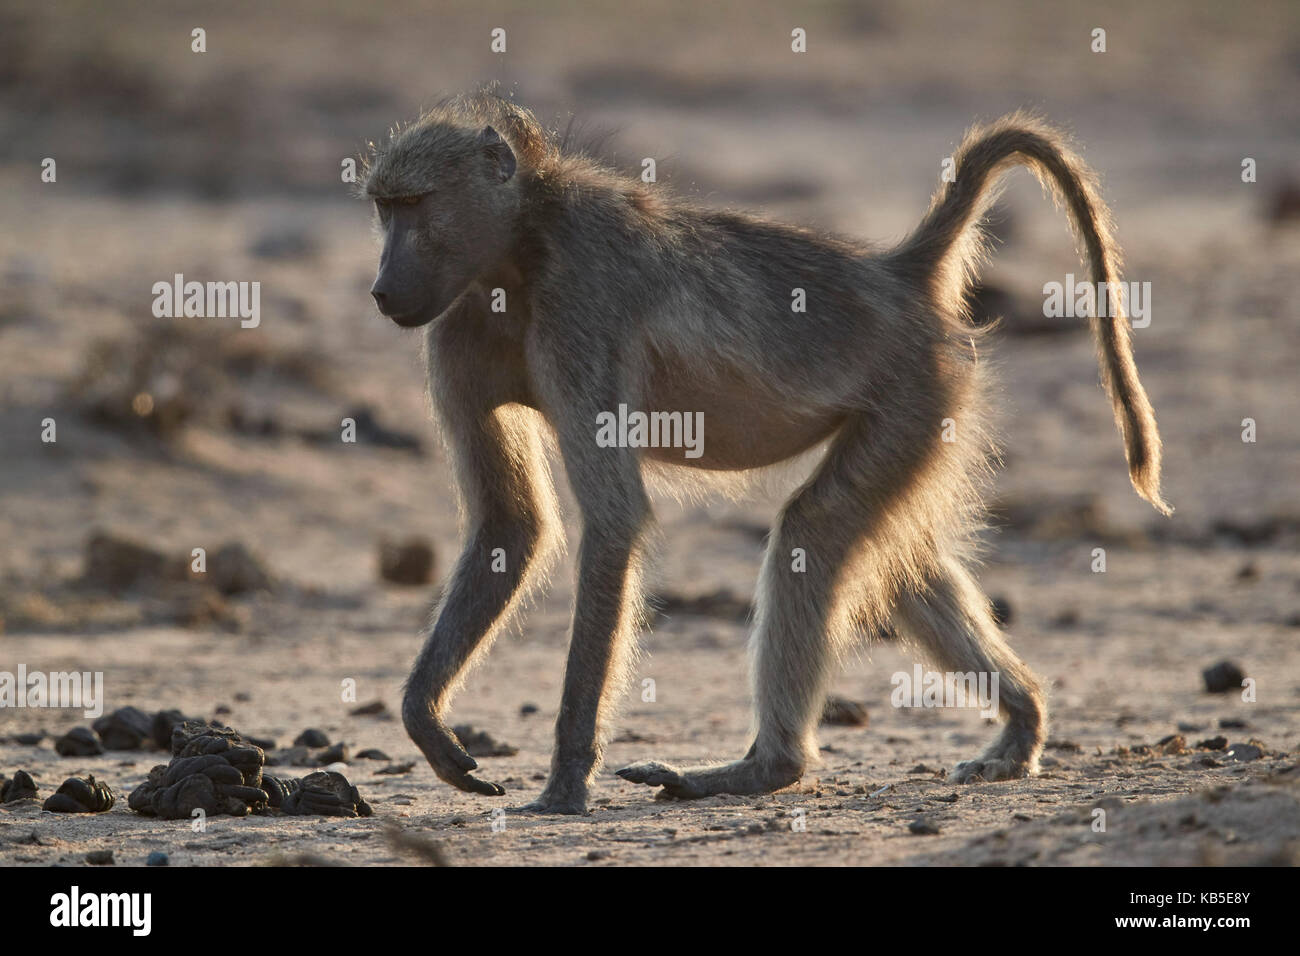 Chacma baboon (papio ursinus), Kruger National Park, Sud Africa e Africa Foto Stock